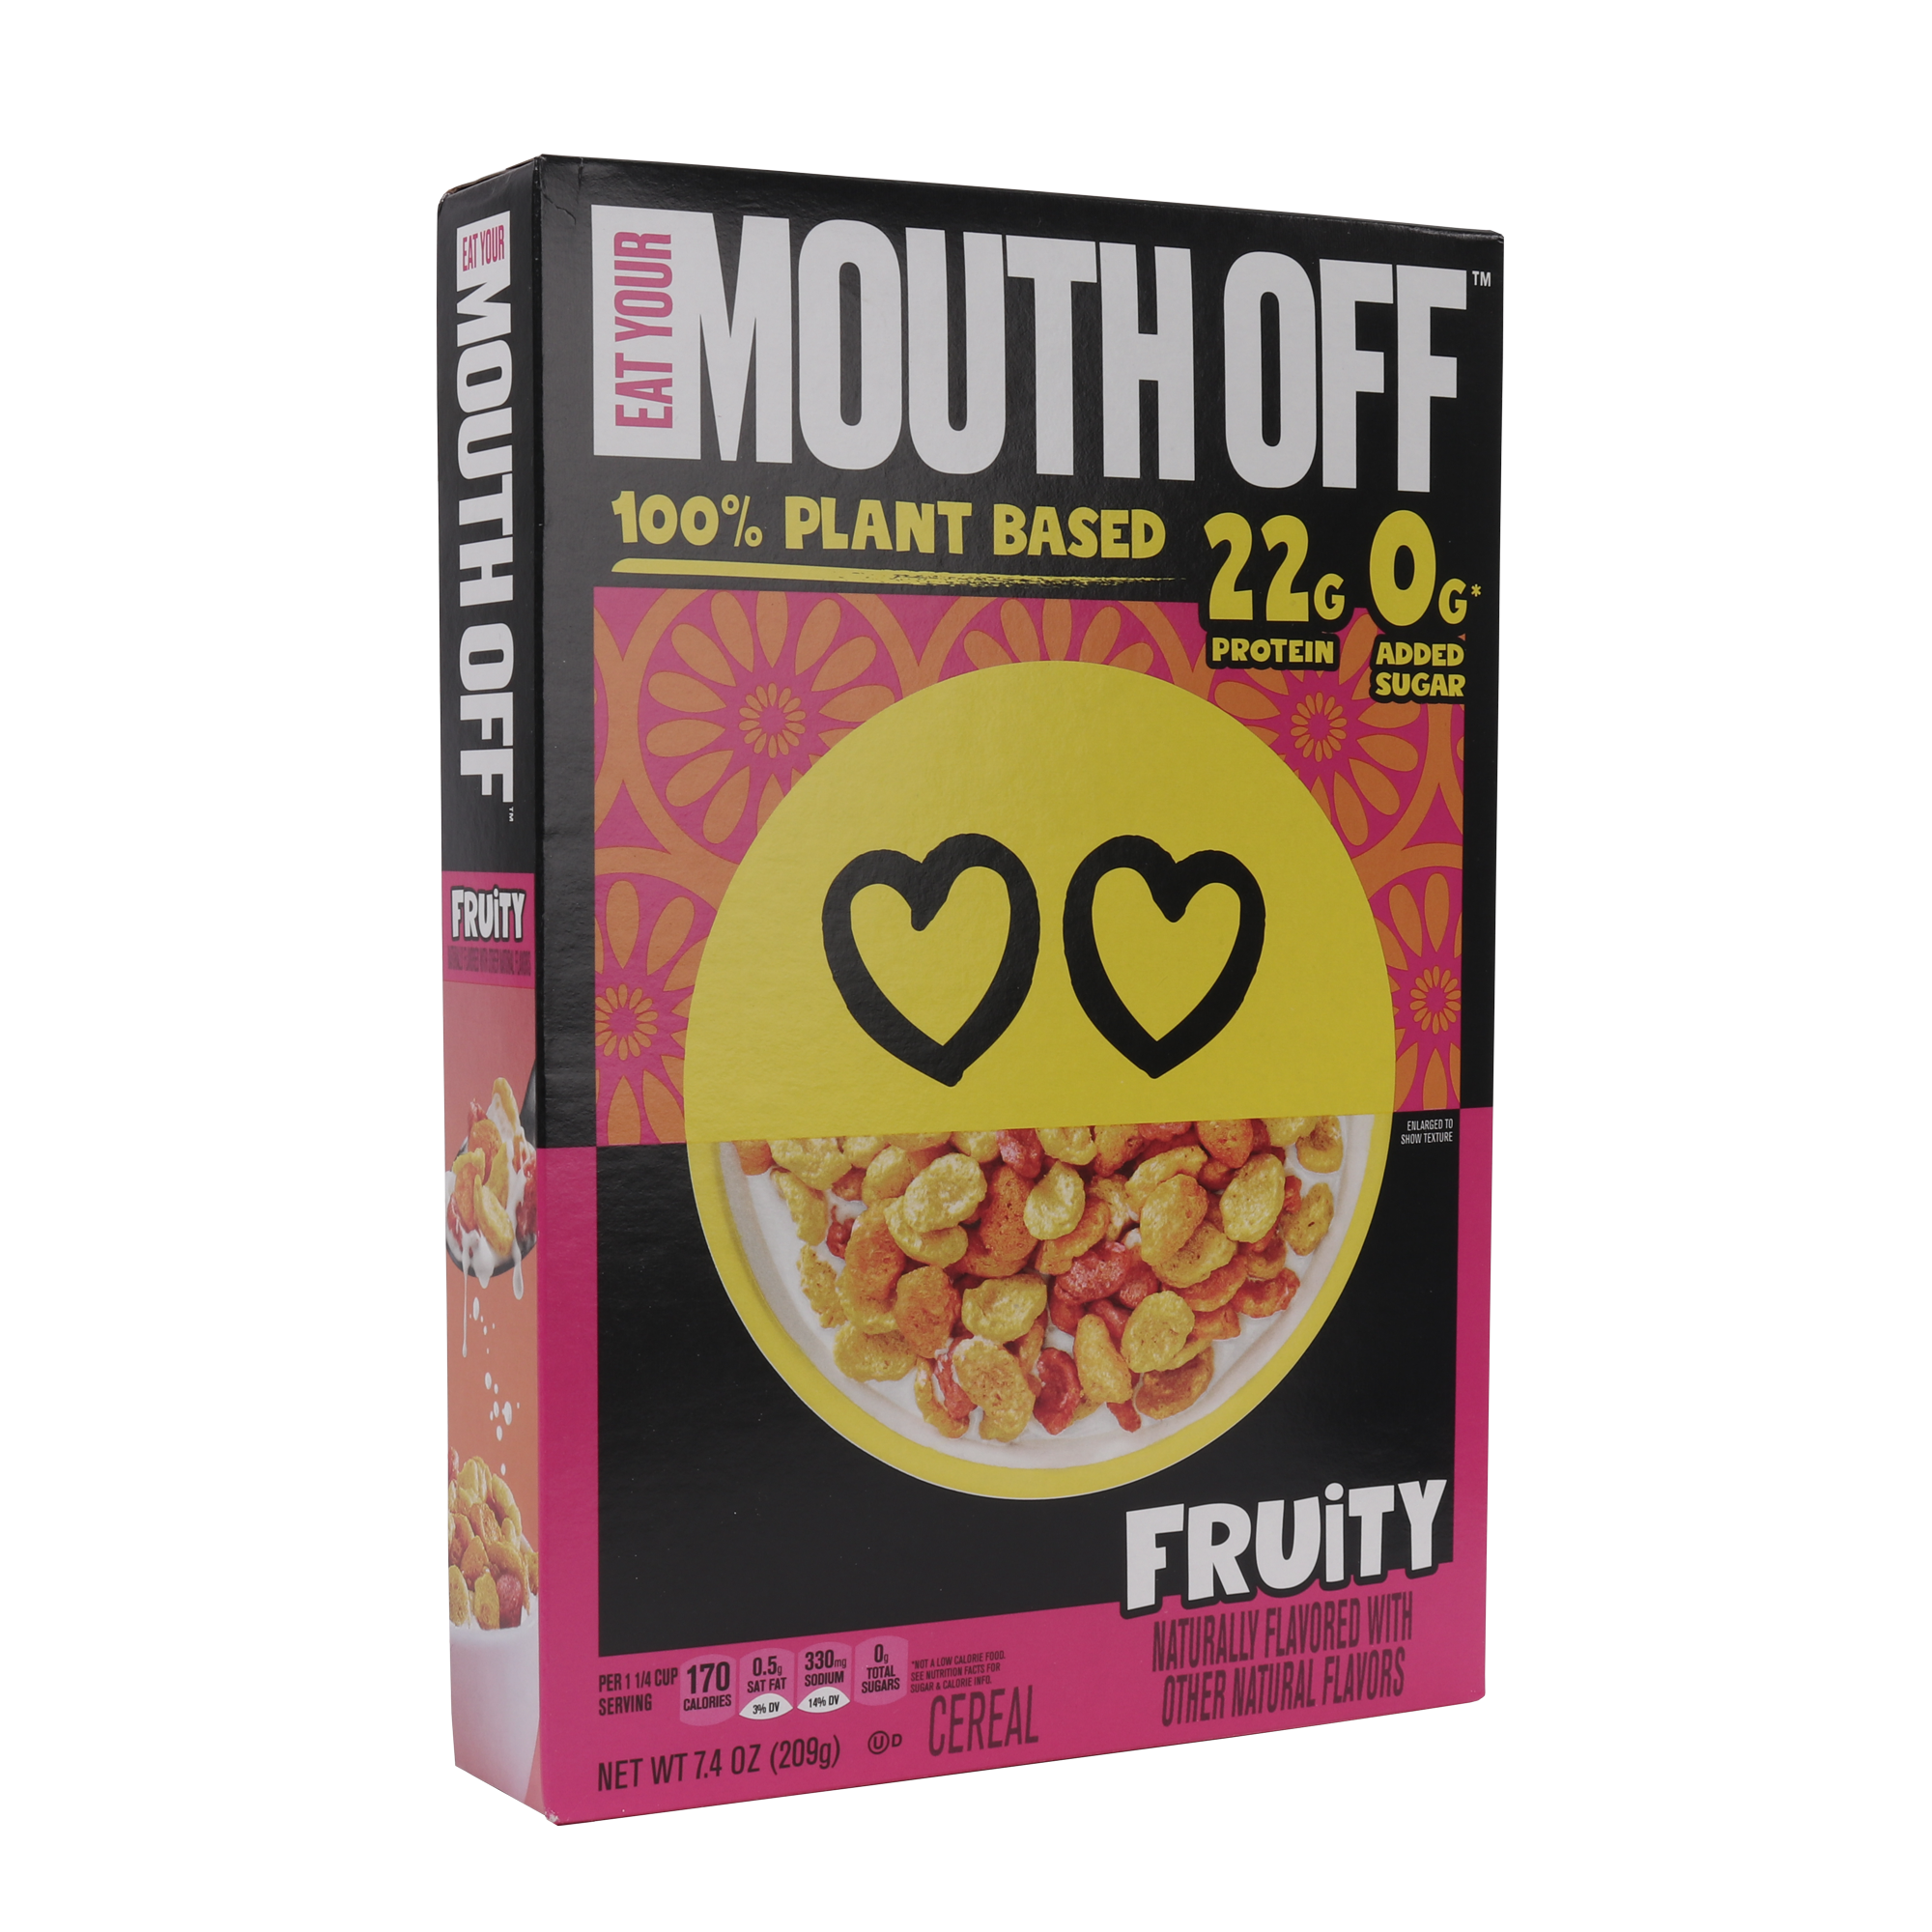 Mouth-Off-Boxes_Fruity-front-quarter-turn.png__PID:f6e298c2-ce64-4ea9-a8eb-ad343d3c5299